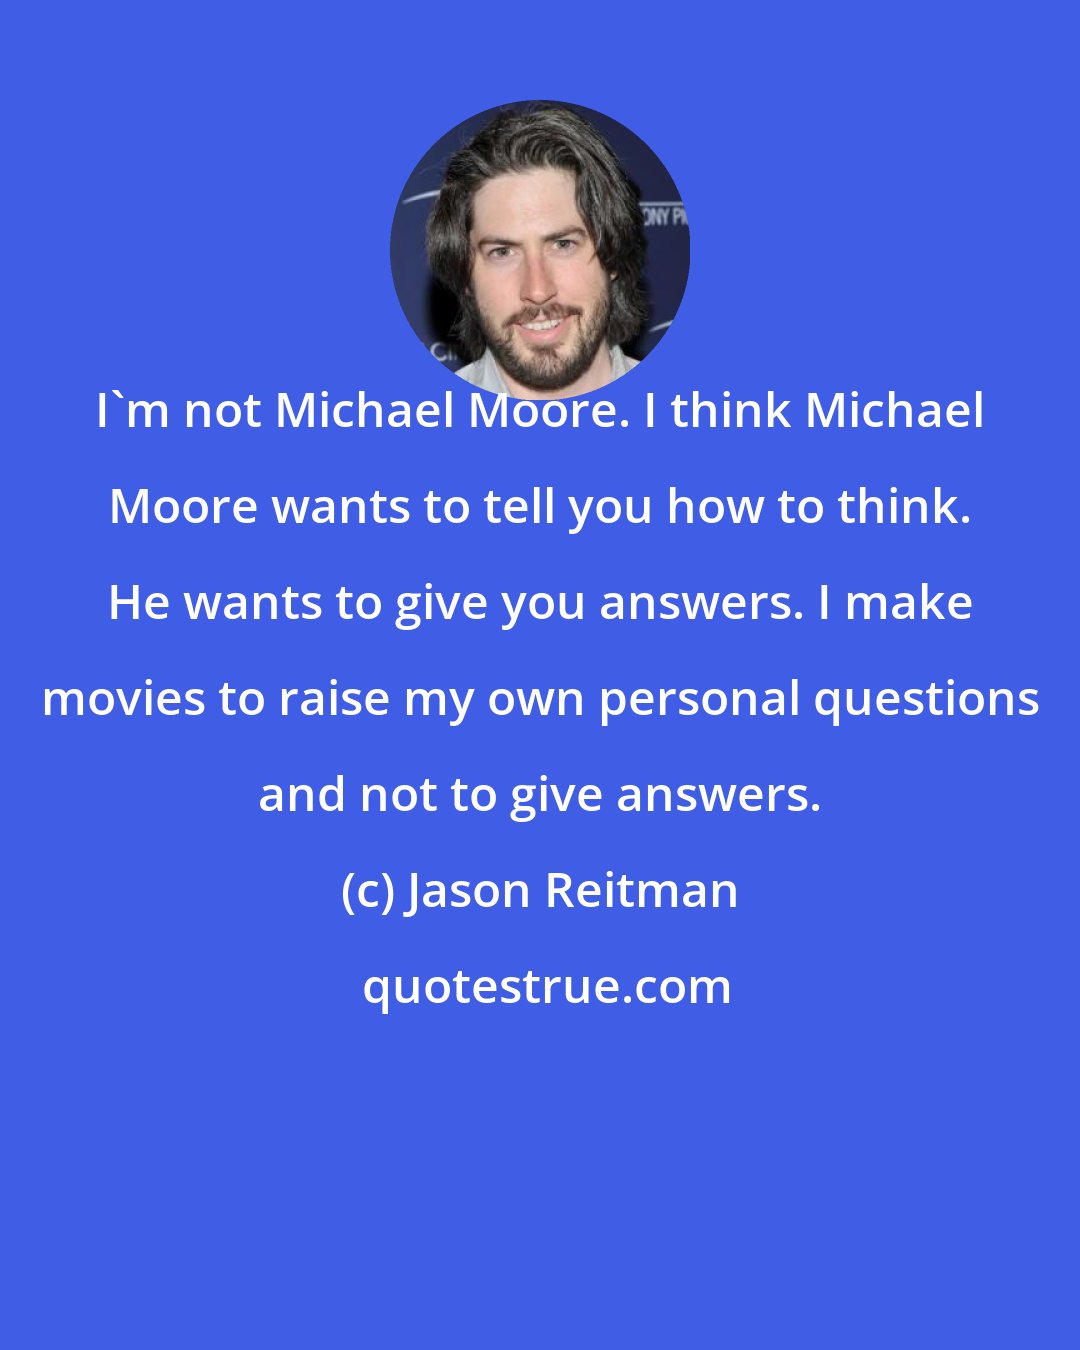 Jason Reitman: I'm not Michael Moore. I think Michael Moore wants to tell you how to think. He wants to give you answers. I make movies to raise my own personal questions and not to give answers.